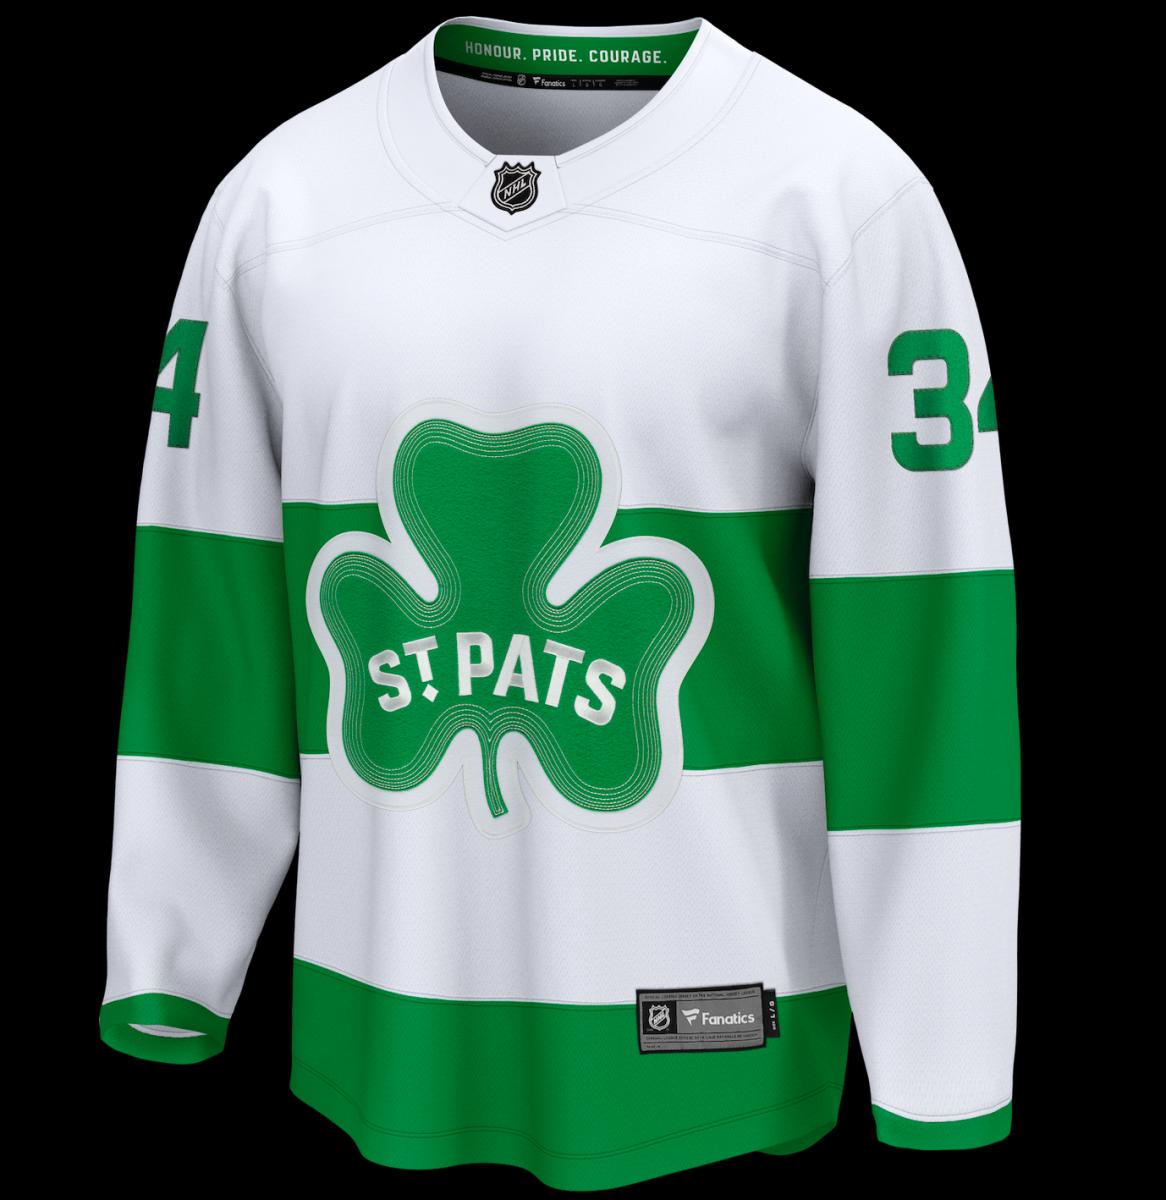 Toronto Maple Leafs St. Pat's Jersey, how to buy your St. Pat's Maple Leafs gear - FanNation | A part of the Sports Illustrated Network